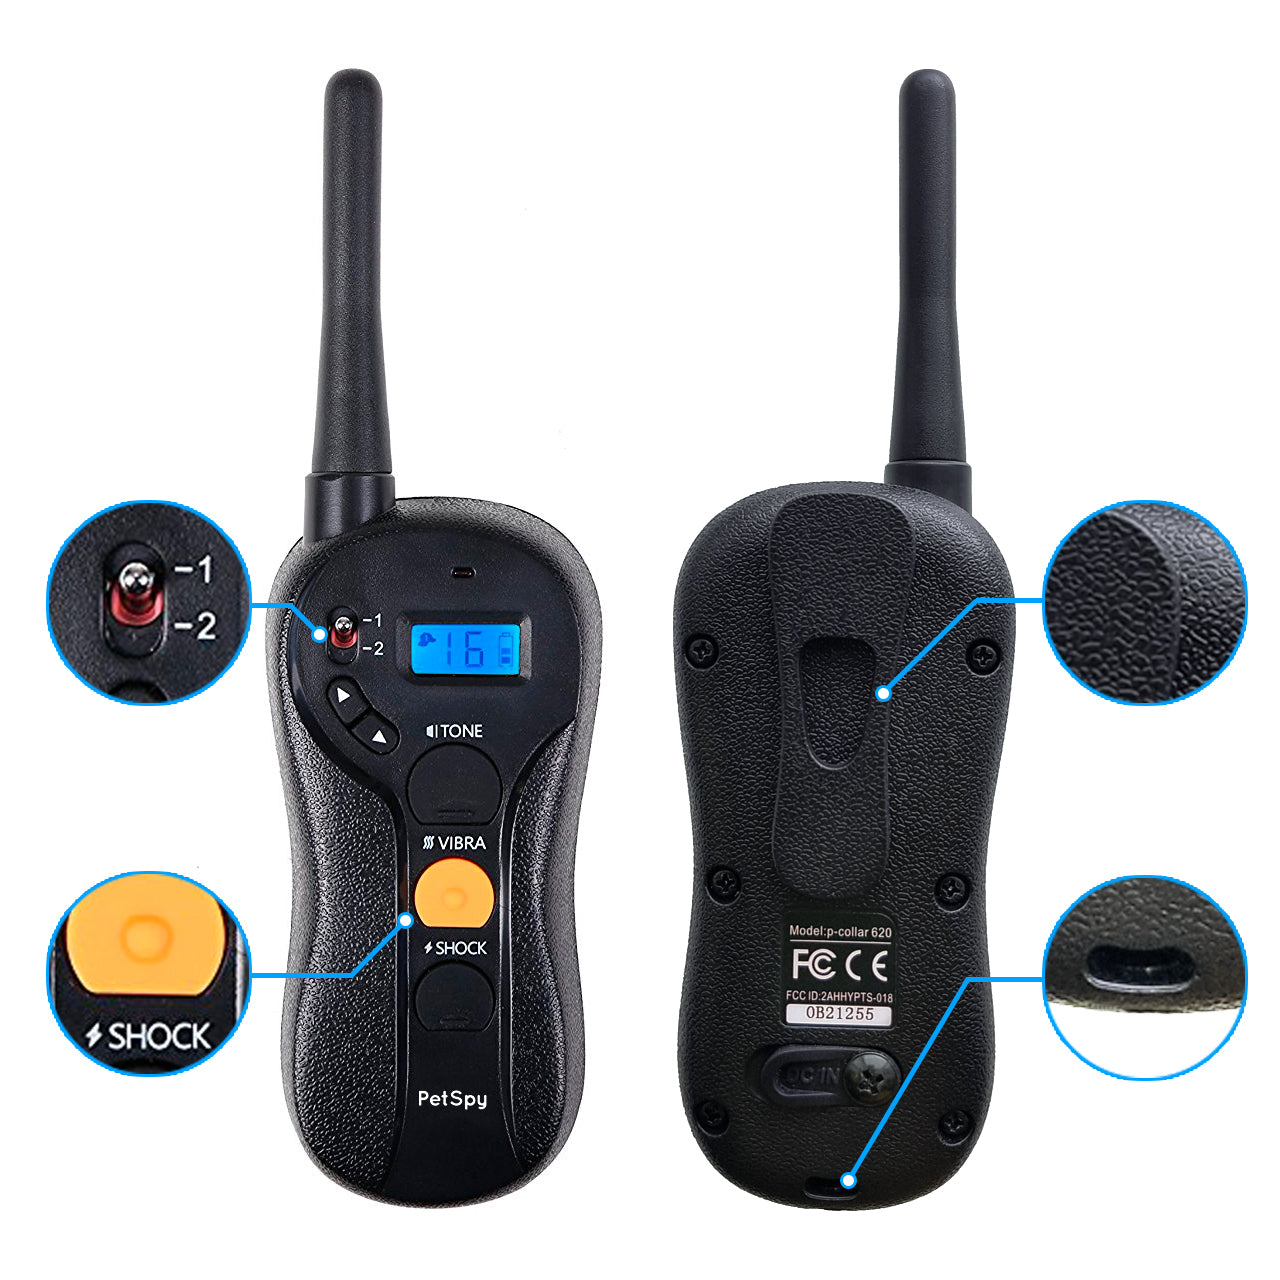 P620 Extra Petspy replacement remote - front and rear view 